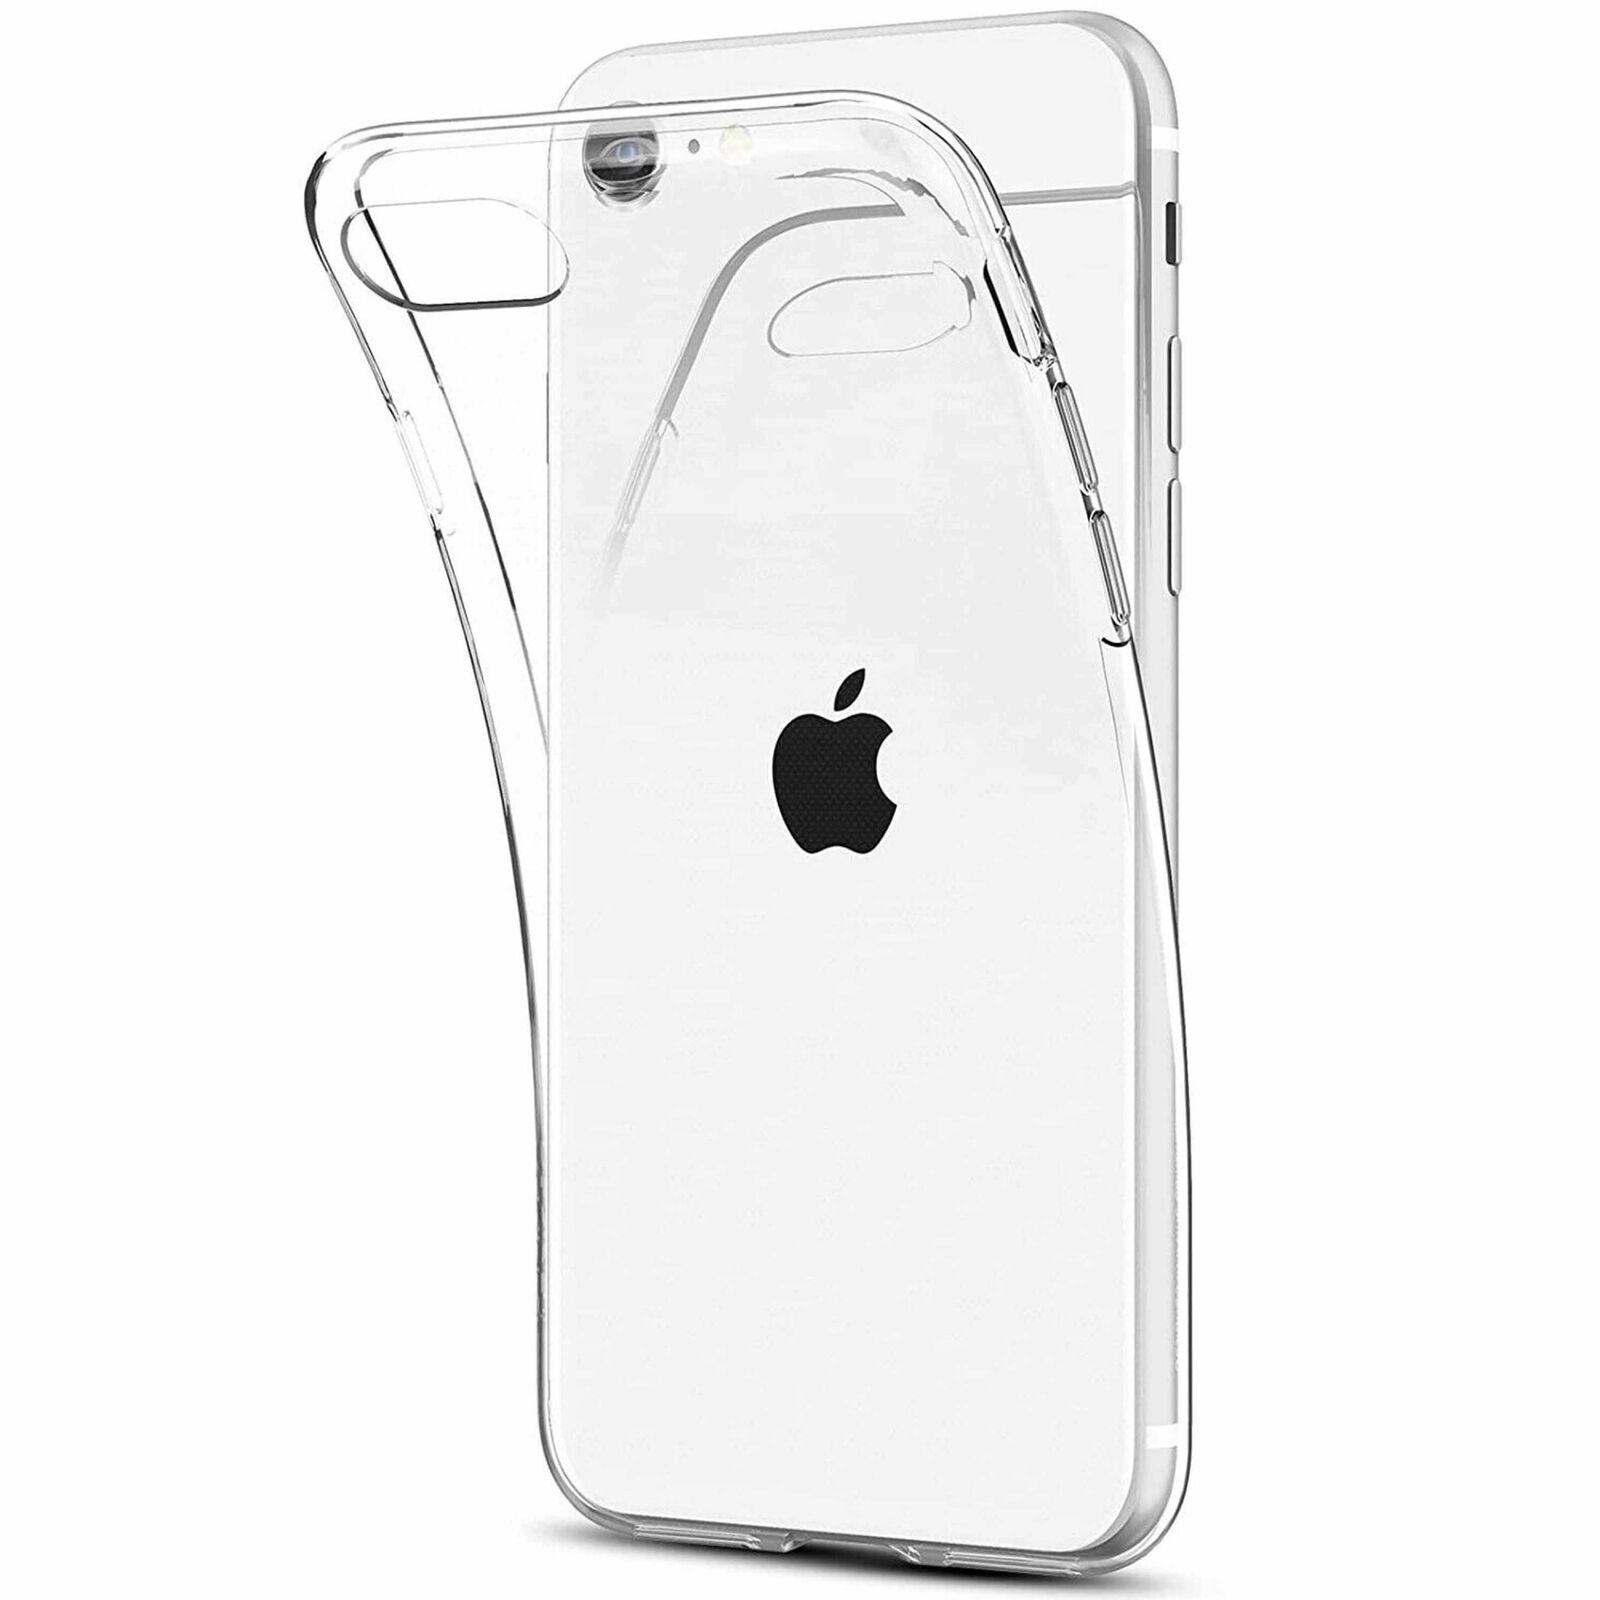 Cover Protective Case For IPHONE 6 0.2oz 6s Silicone Protection Scratches Case _